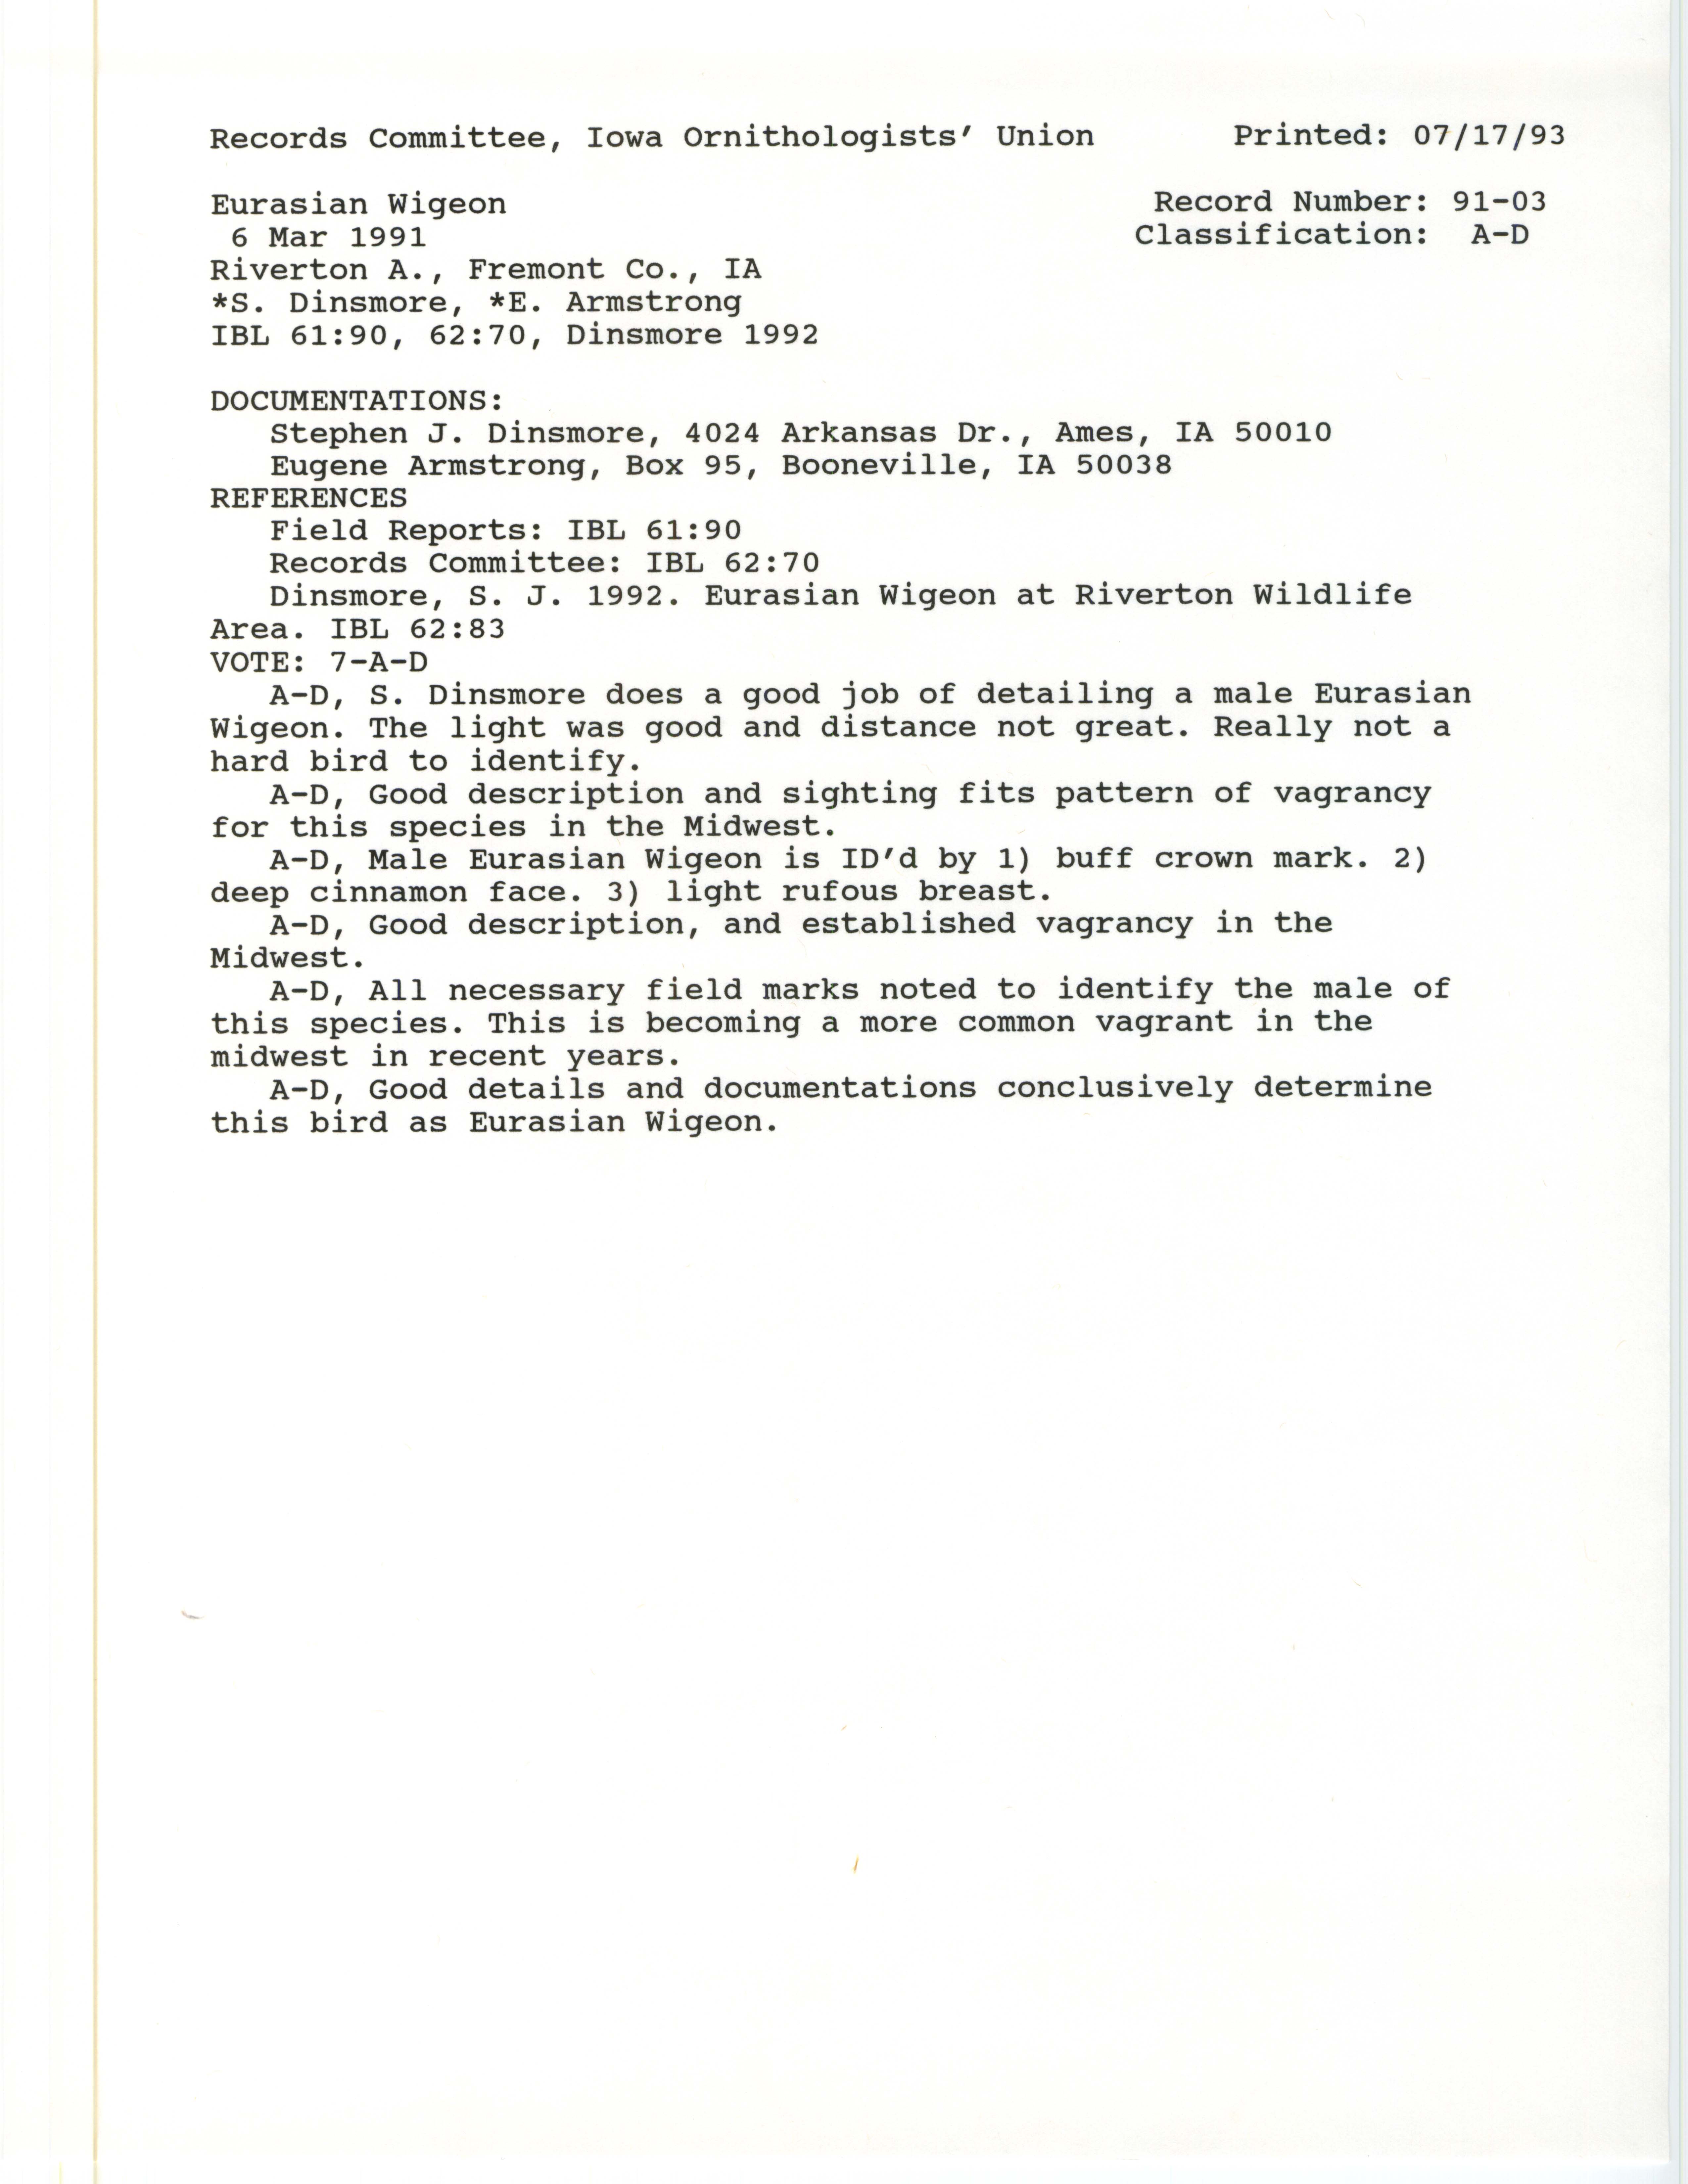 Records Committee review for rare bird sighting of Eurasian Wigeon at Riverton Area, 1991